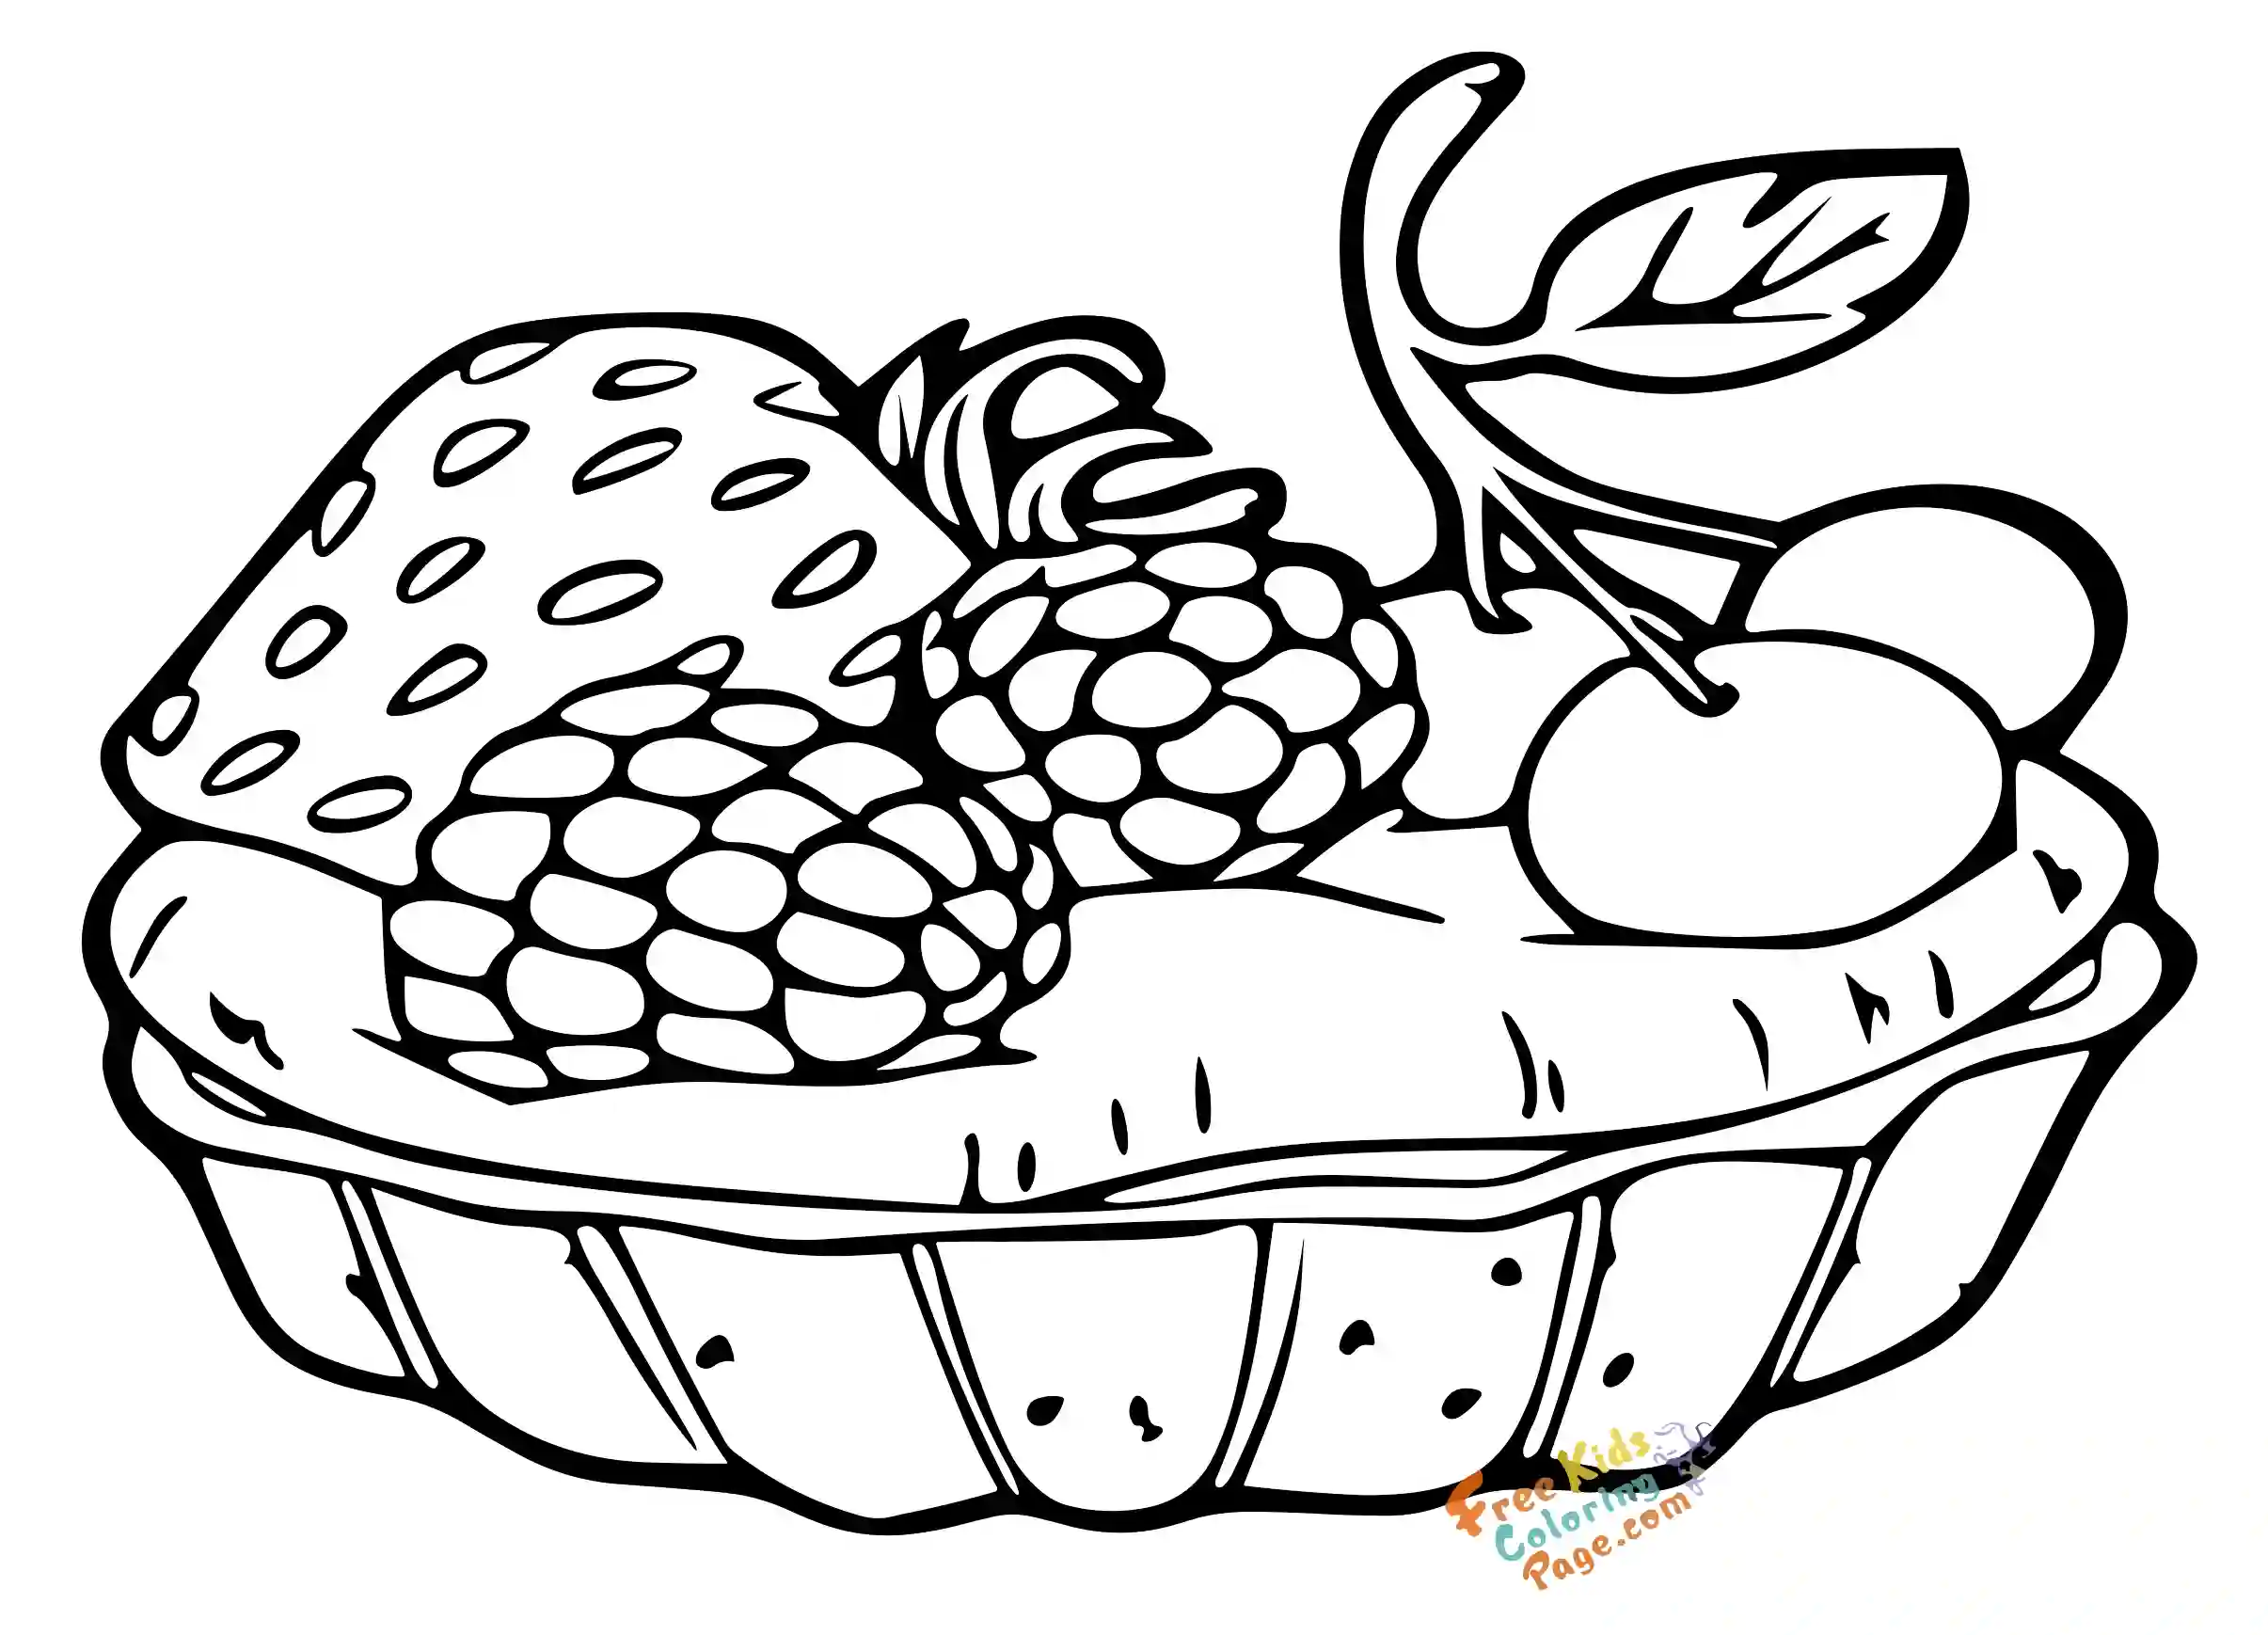 Berries pie coloring pages to print for kids. Berries strawberry boysenberry blackberry cherries